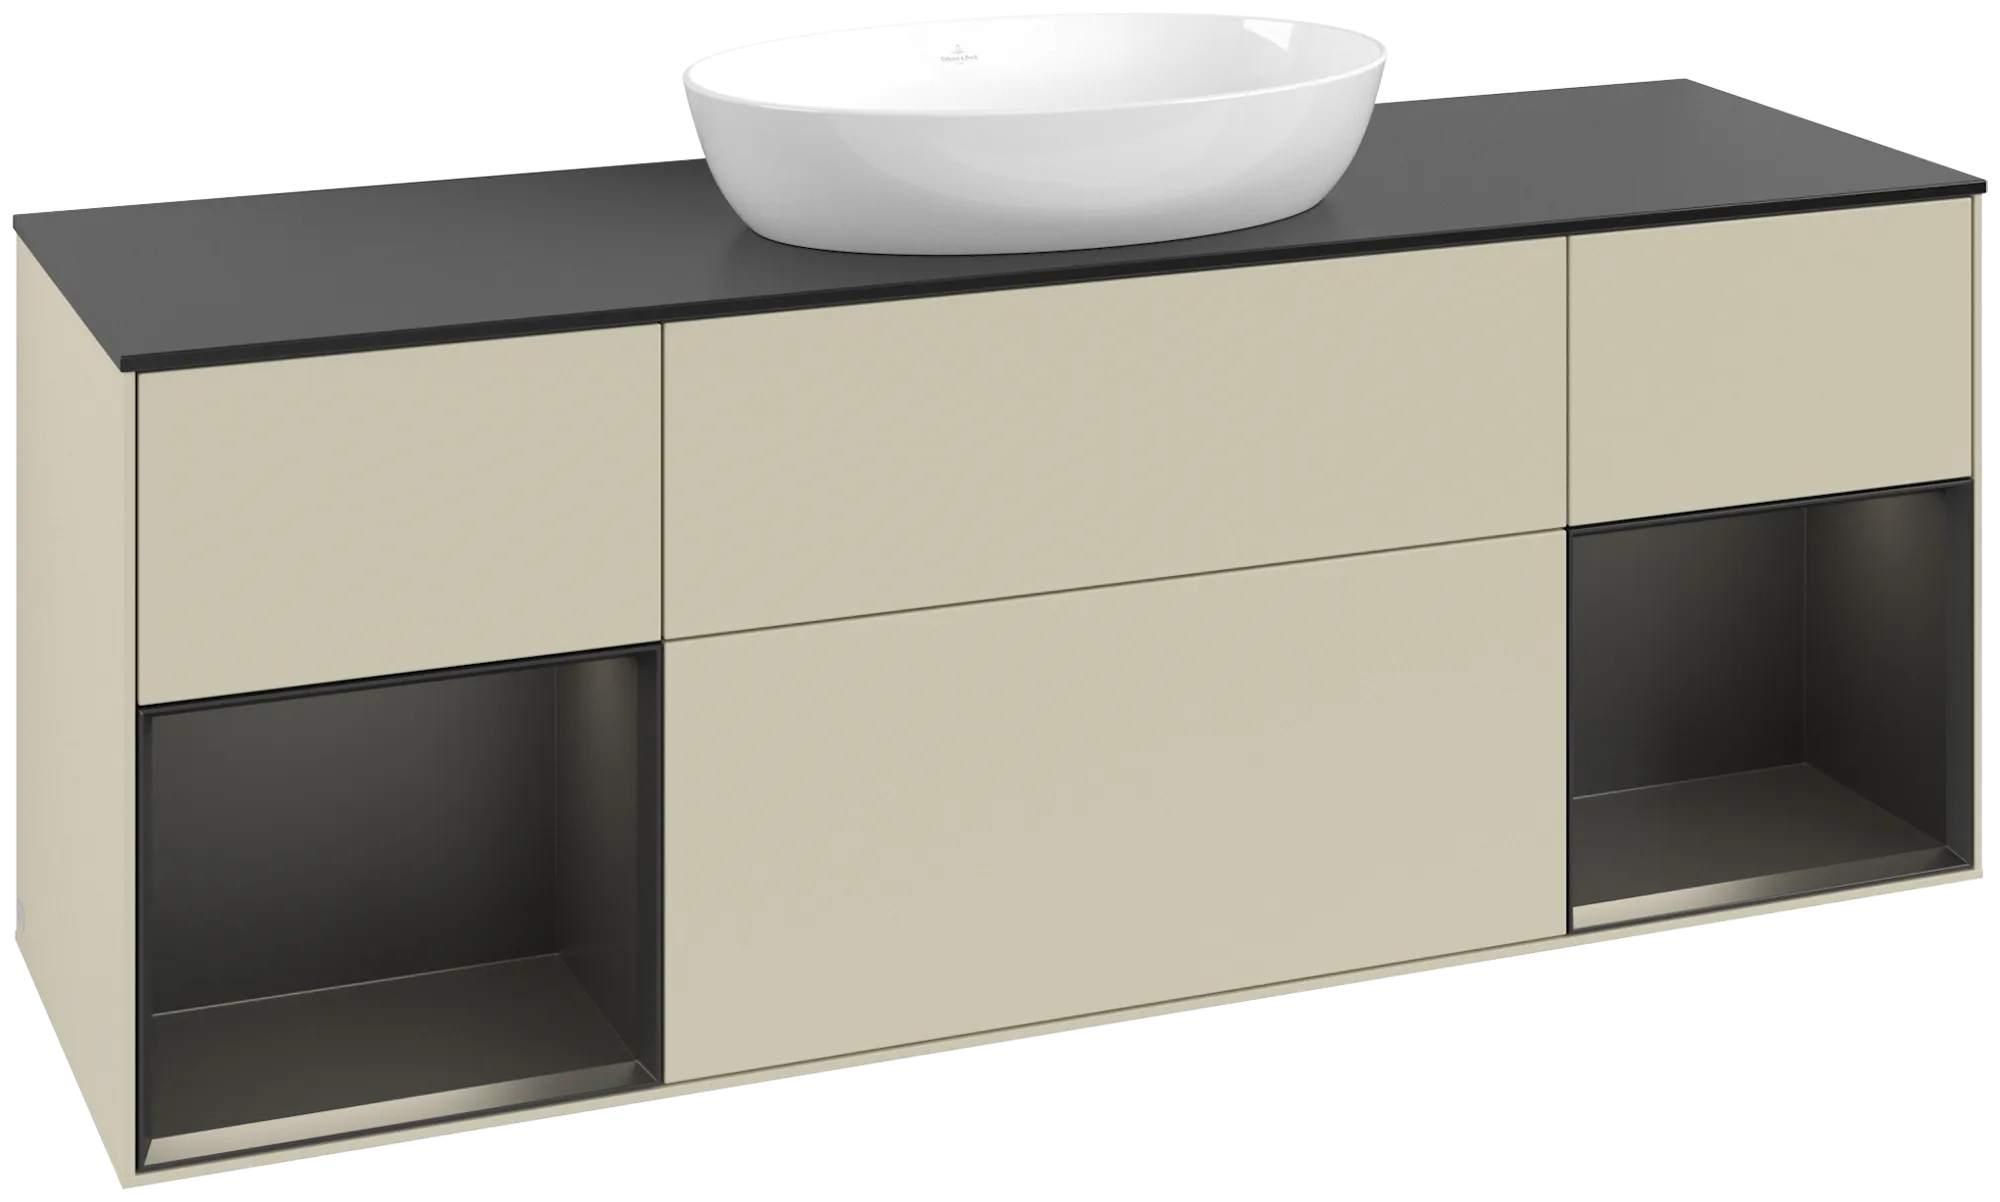 Picture of VILLEROY BOCH Finion Vanity unit, with lighting, 4 pull-out compartments, 1600 x 603 x 501 mm, Silk Grey Matt Lacquer / Black Matt Lacquer / Glass Black Matt #FD02PDHJ